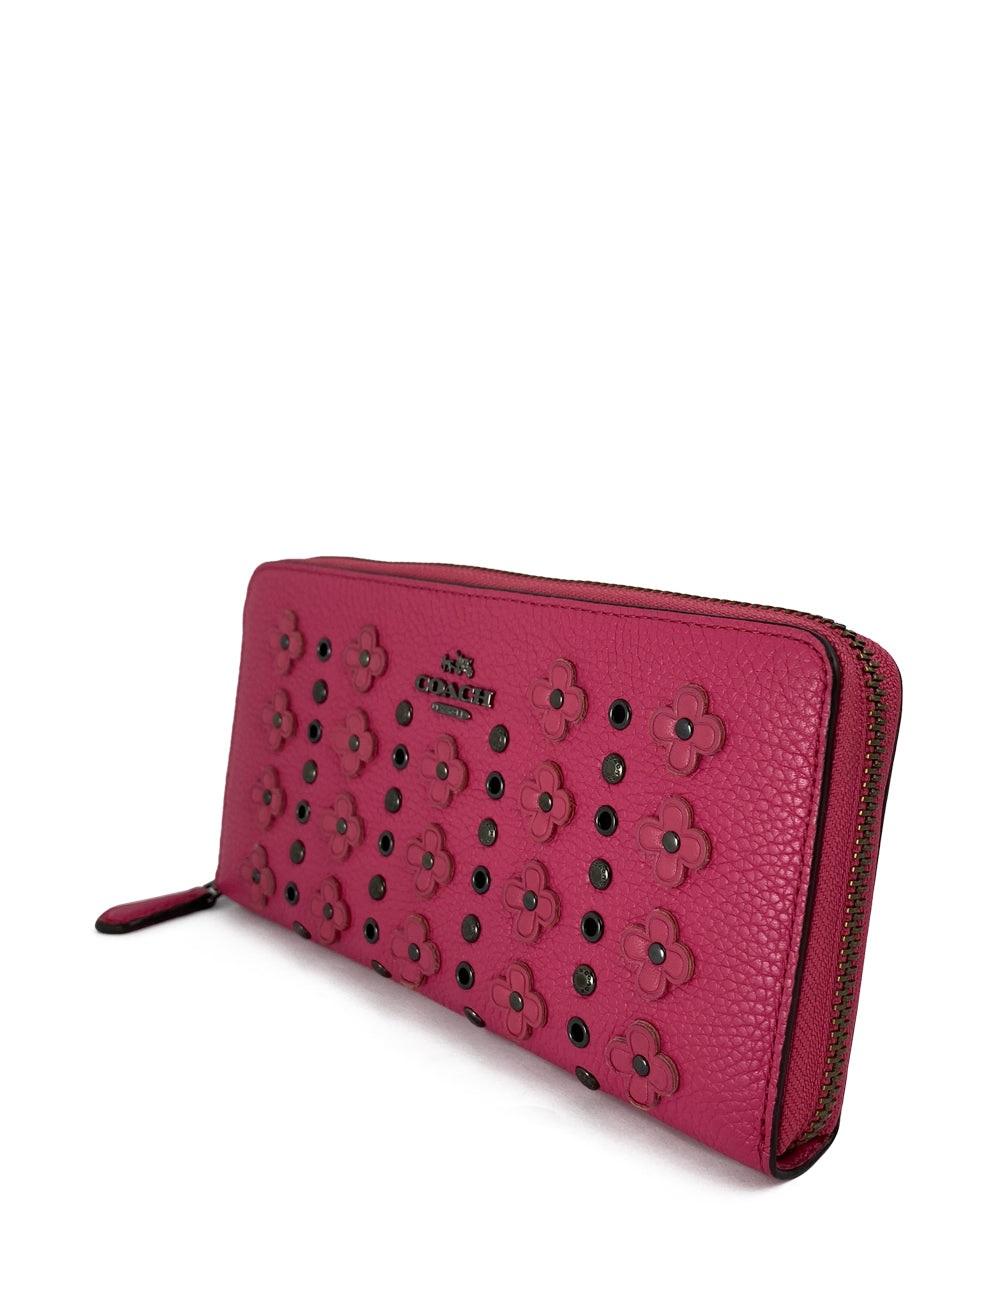 Fuchsia pink Coach wallet with flower and black stud detail, includes 5 slide compartments, one zipper compartment, and 12 card compartments on the inside. In excellent condition.

Additional information:
Material: leather 
Measurements: 19.5 W x 2